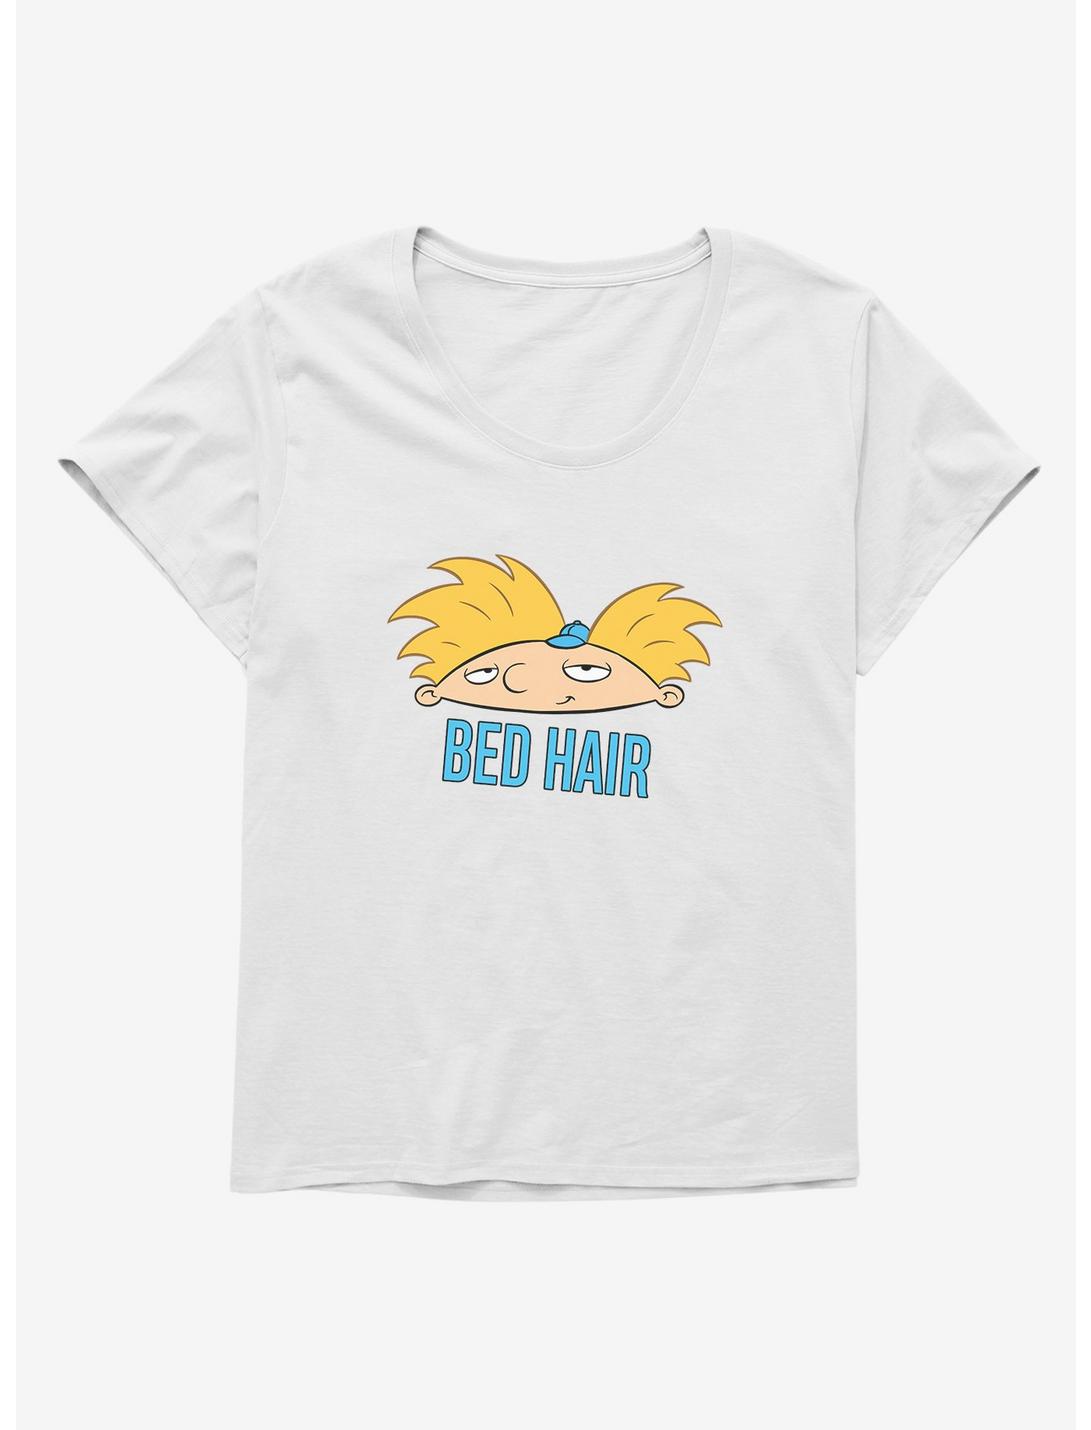 Hey Arnold! Bed Hair Girls T-Shirt Plus Size, , hi-res